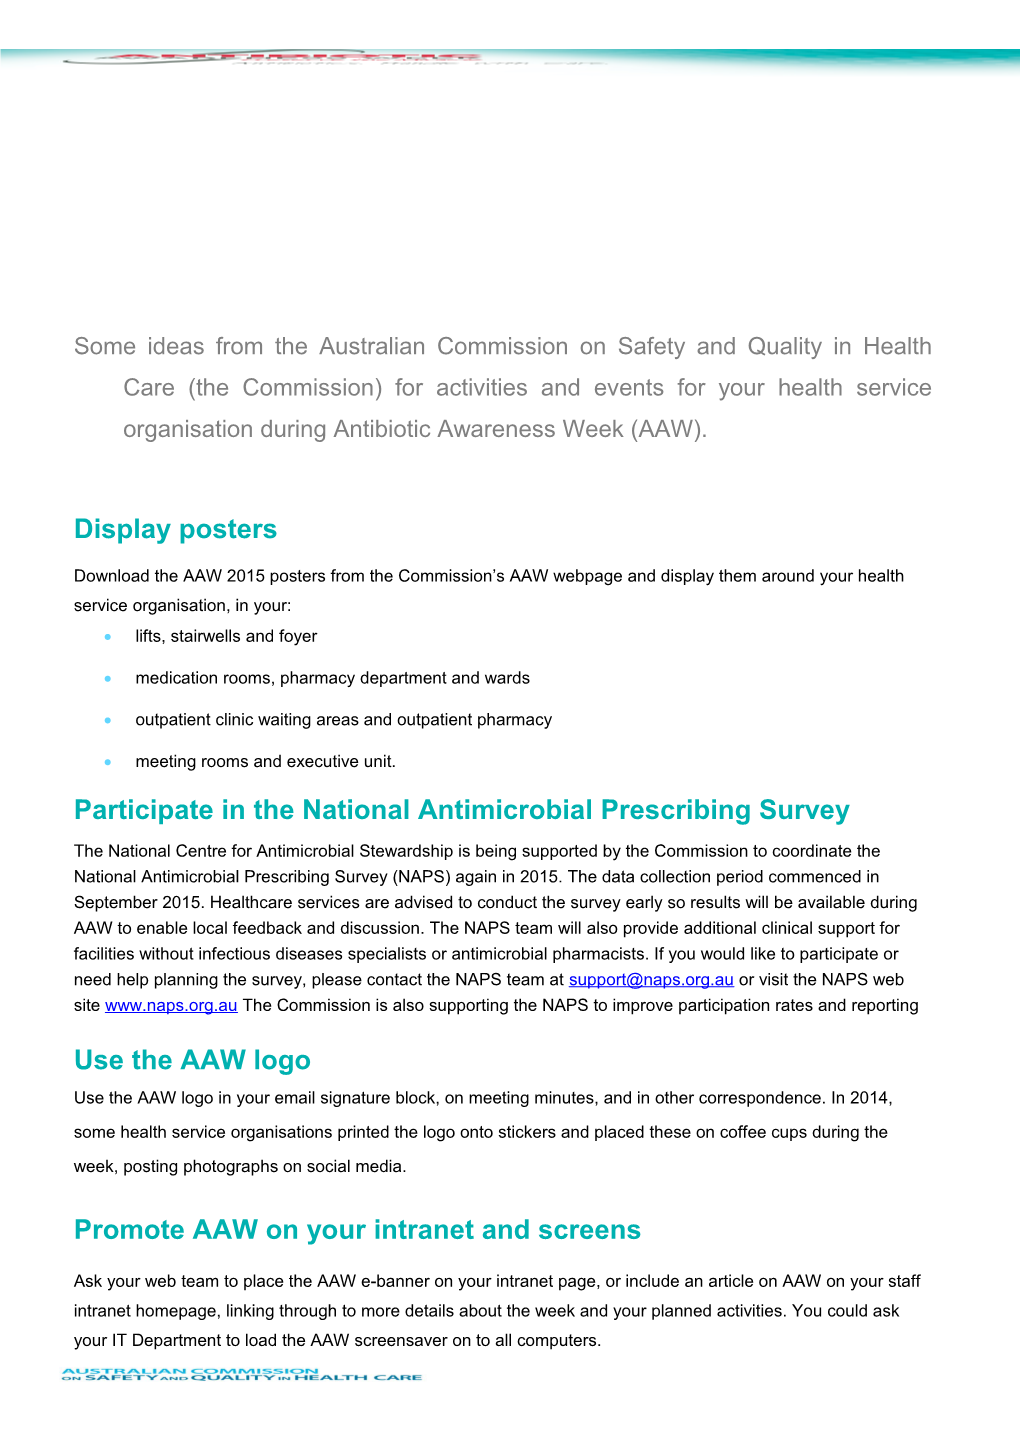 Some Ideas from the Australian Commission on Safety and Quality in Health Care (The Commission)